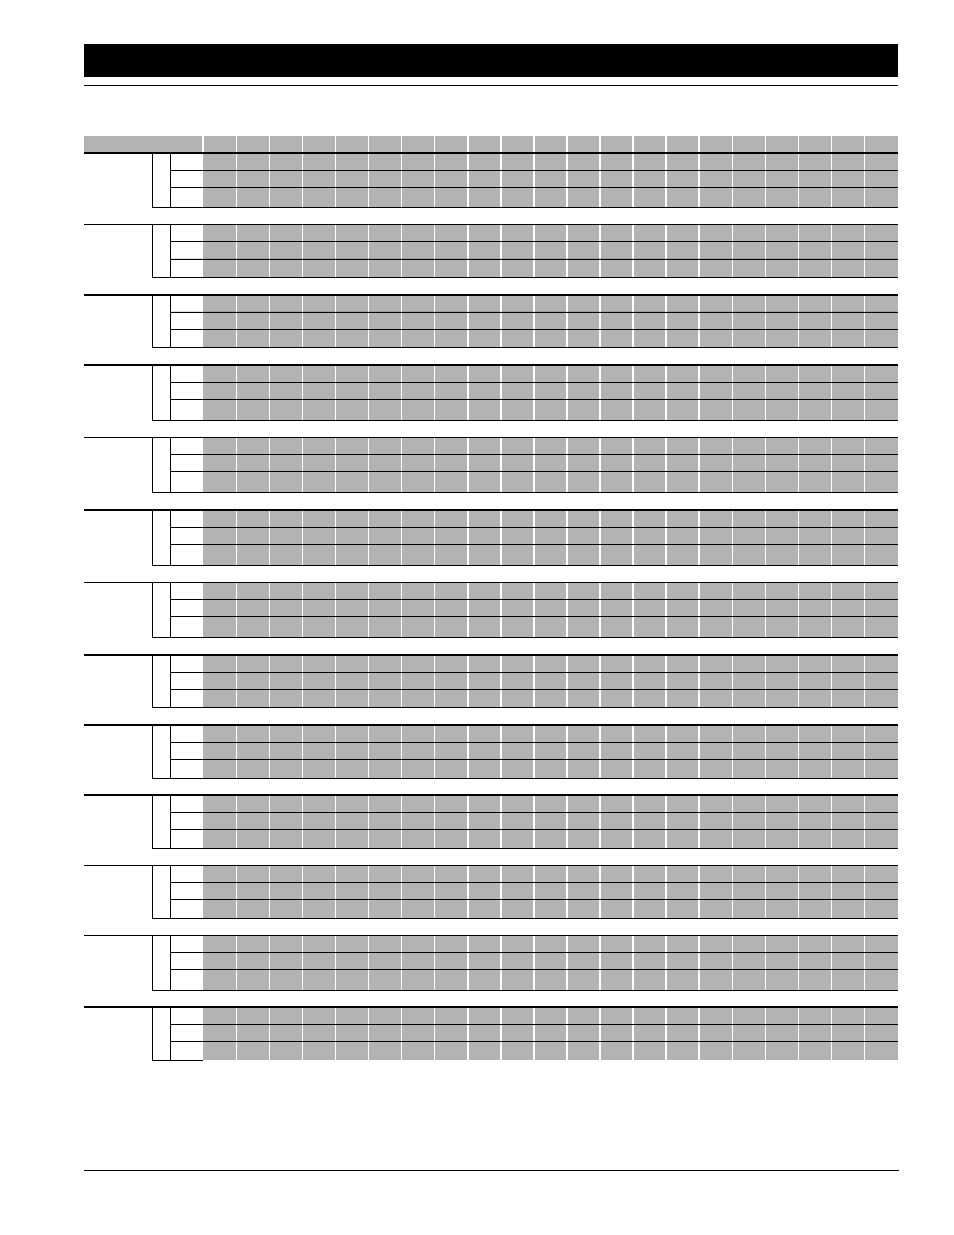 Seed Rate Chart